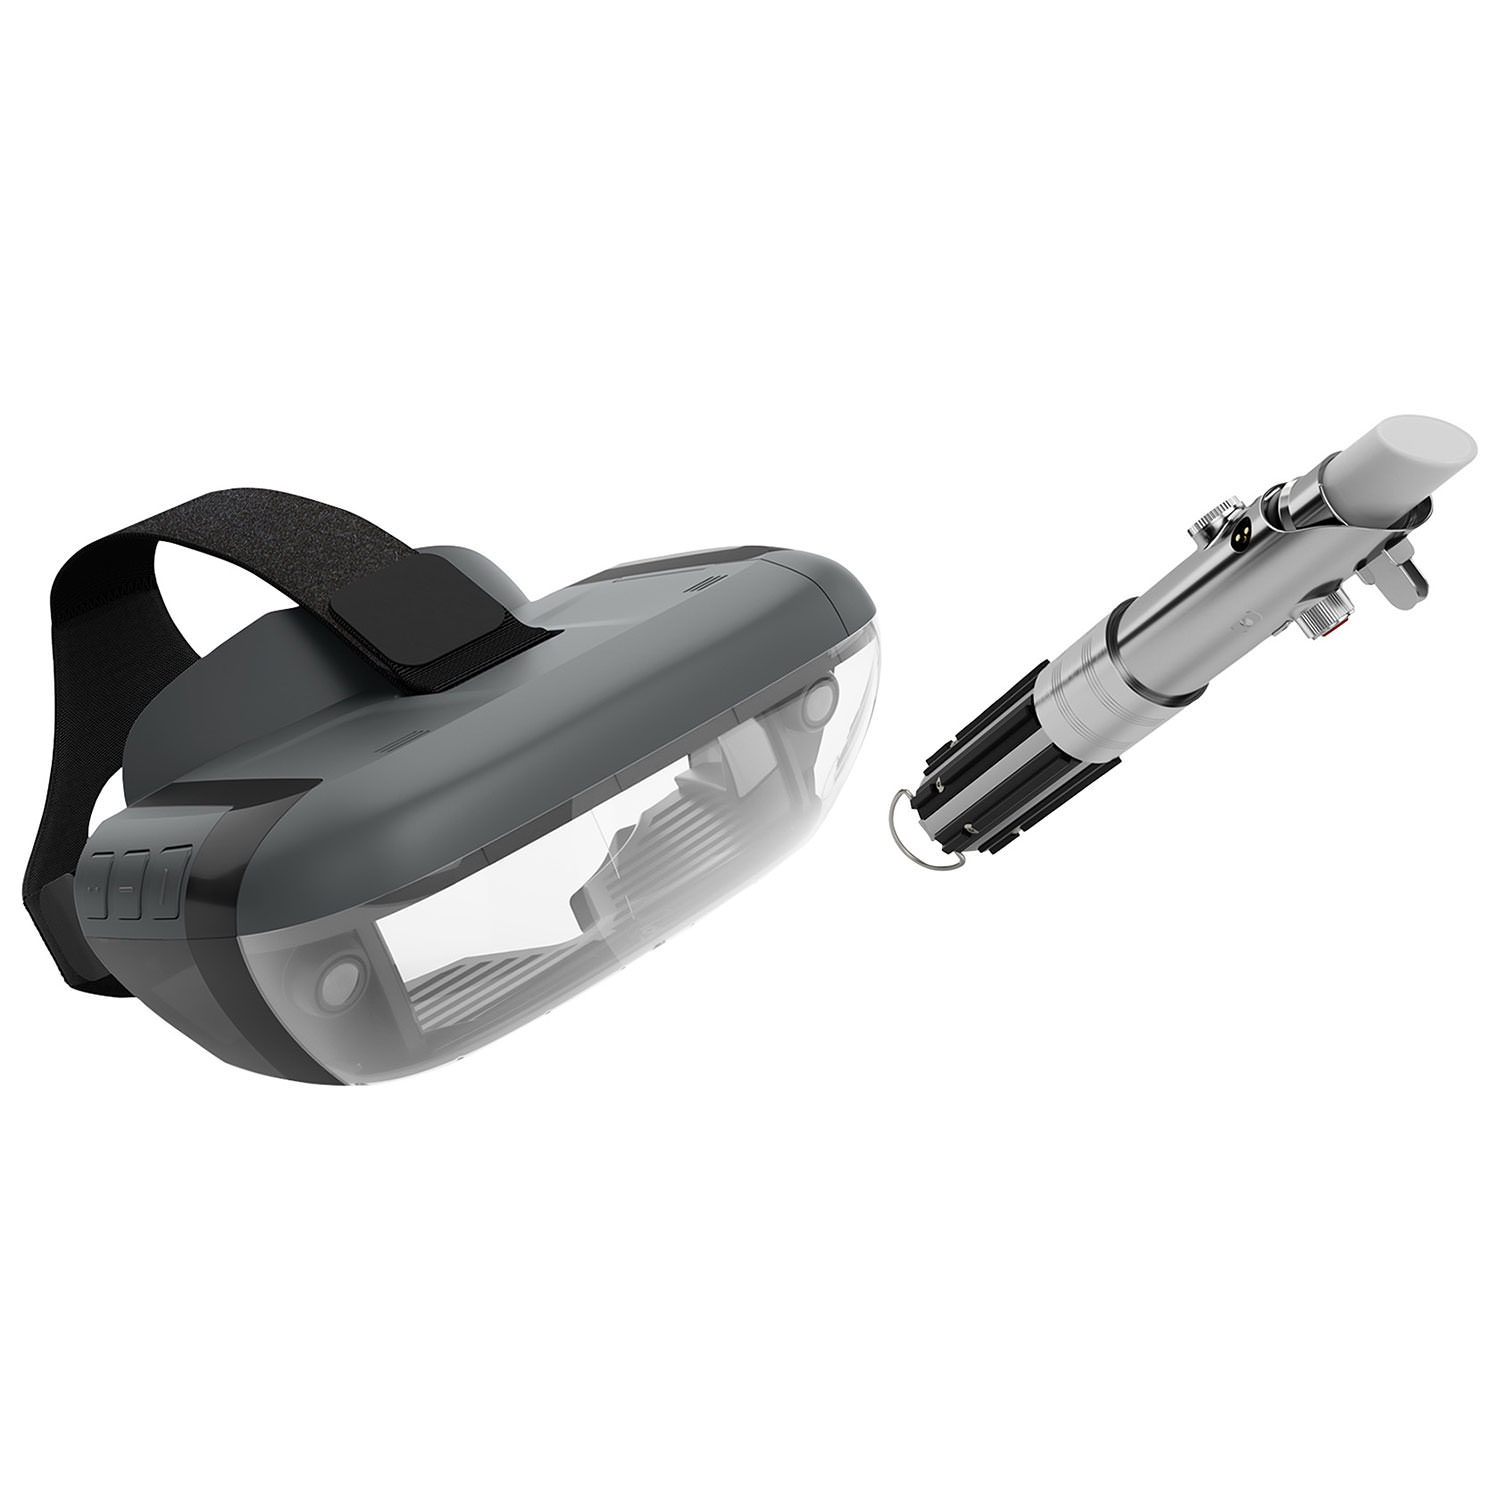 Star Wars: Jedi Challenges Lenovo Mirage AR headset with Lightsaber Controller & Tracking Beacon - image 4 of 16